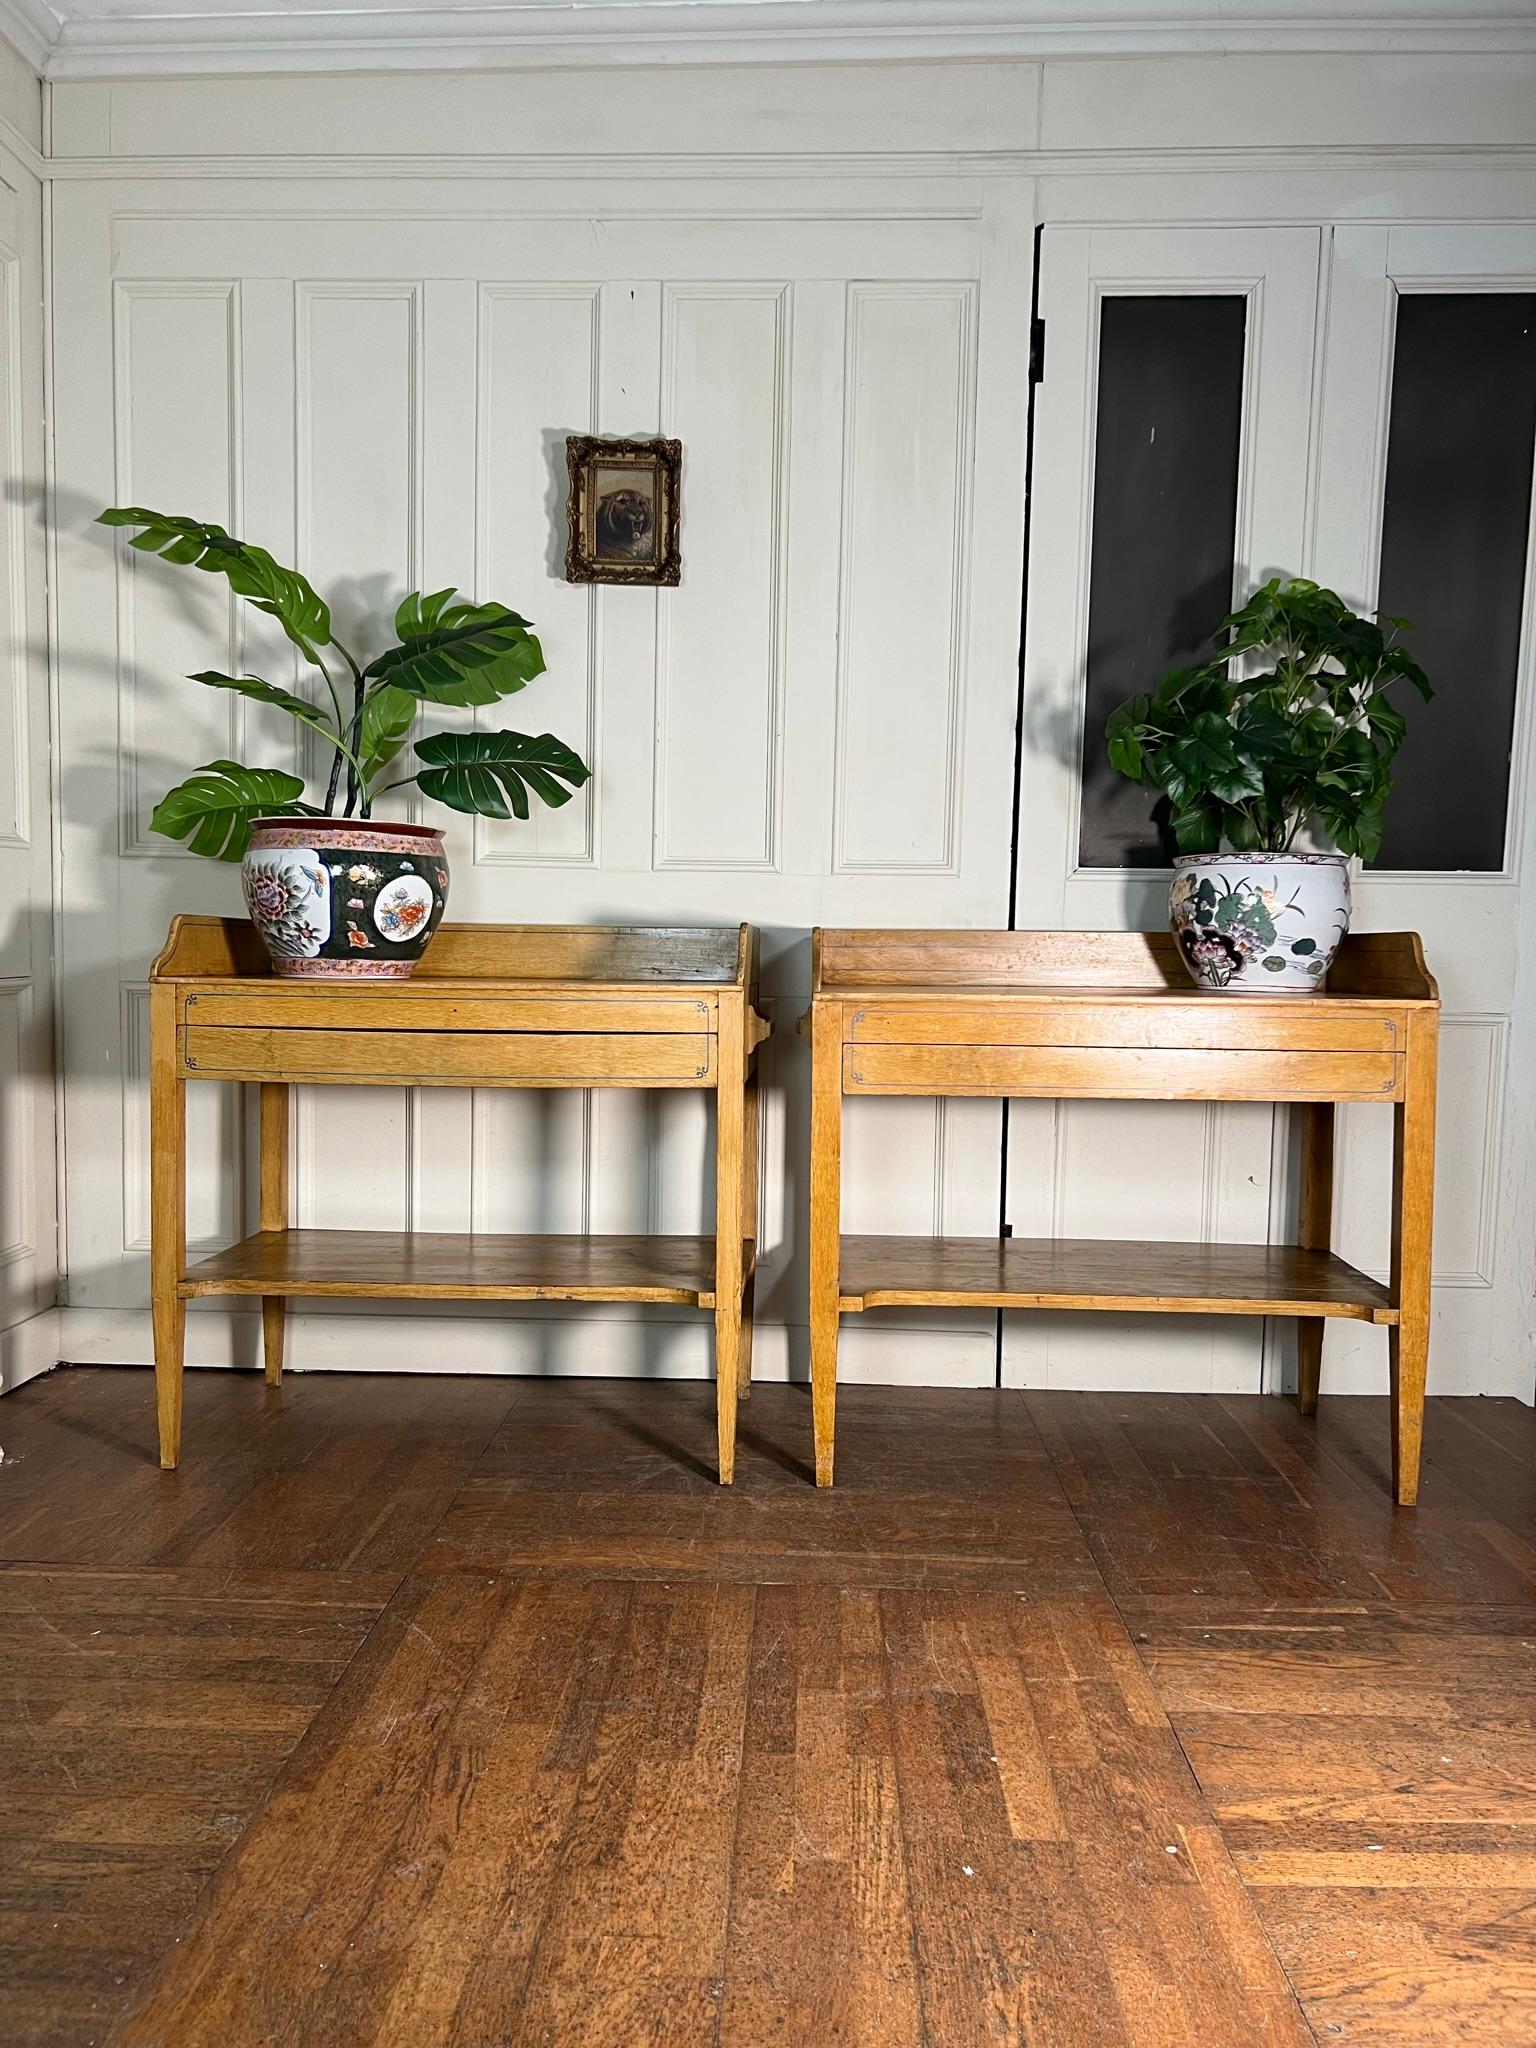 Nice pair of scumble painted pine wash stands with under drawers and lower shelf.

Good size for dressing tables or desks.

Stripped work top.

Some marking to shelves as shown.

English 19th century.

Price is for the pair.